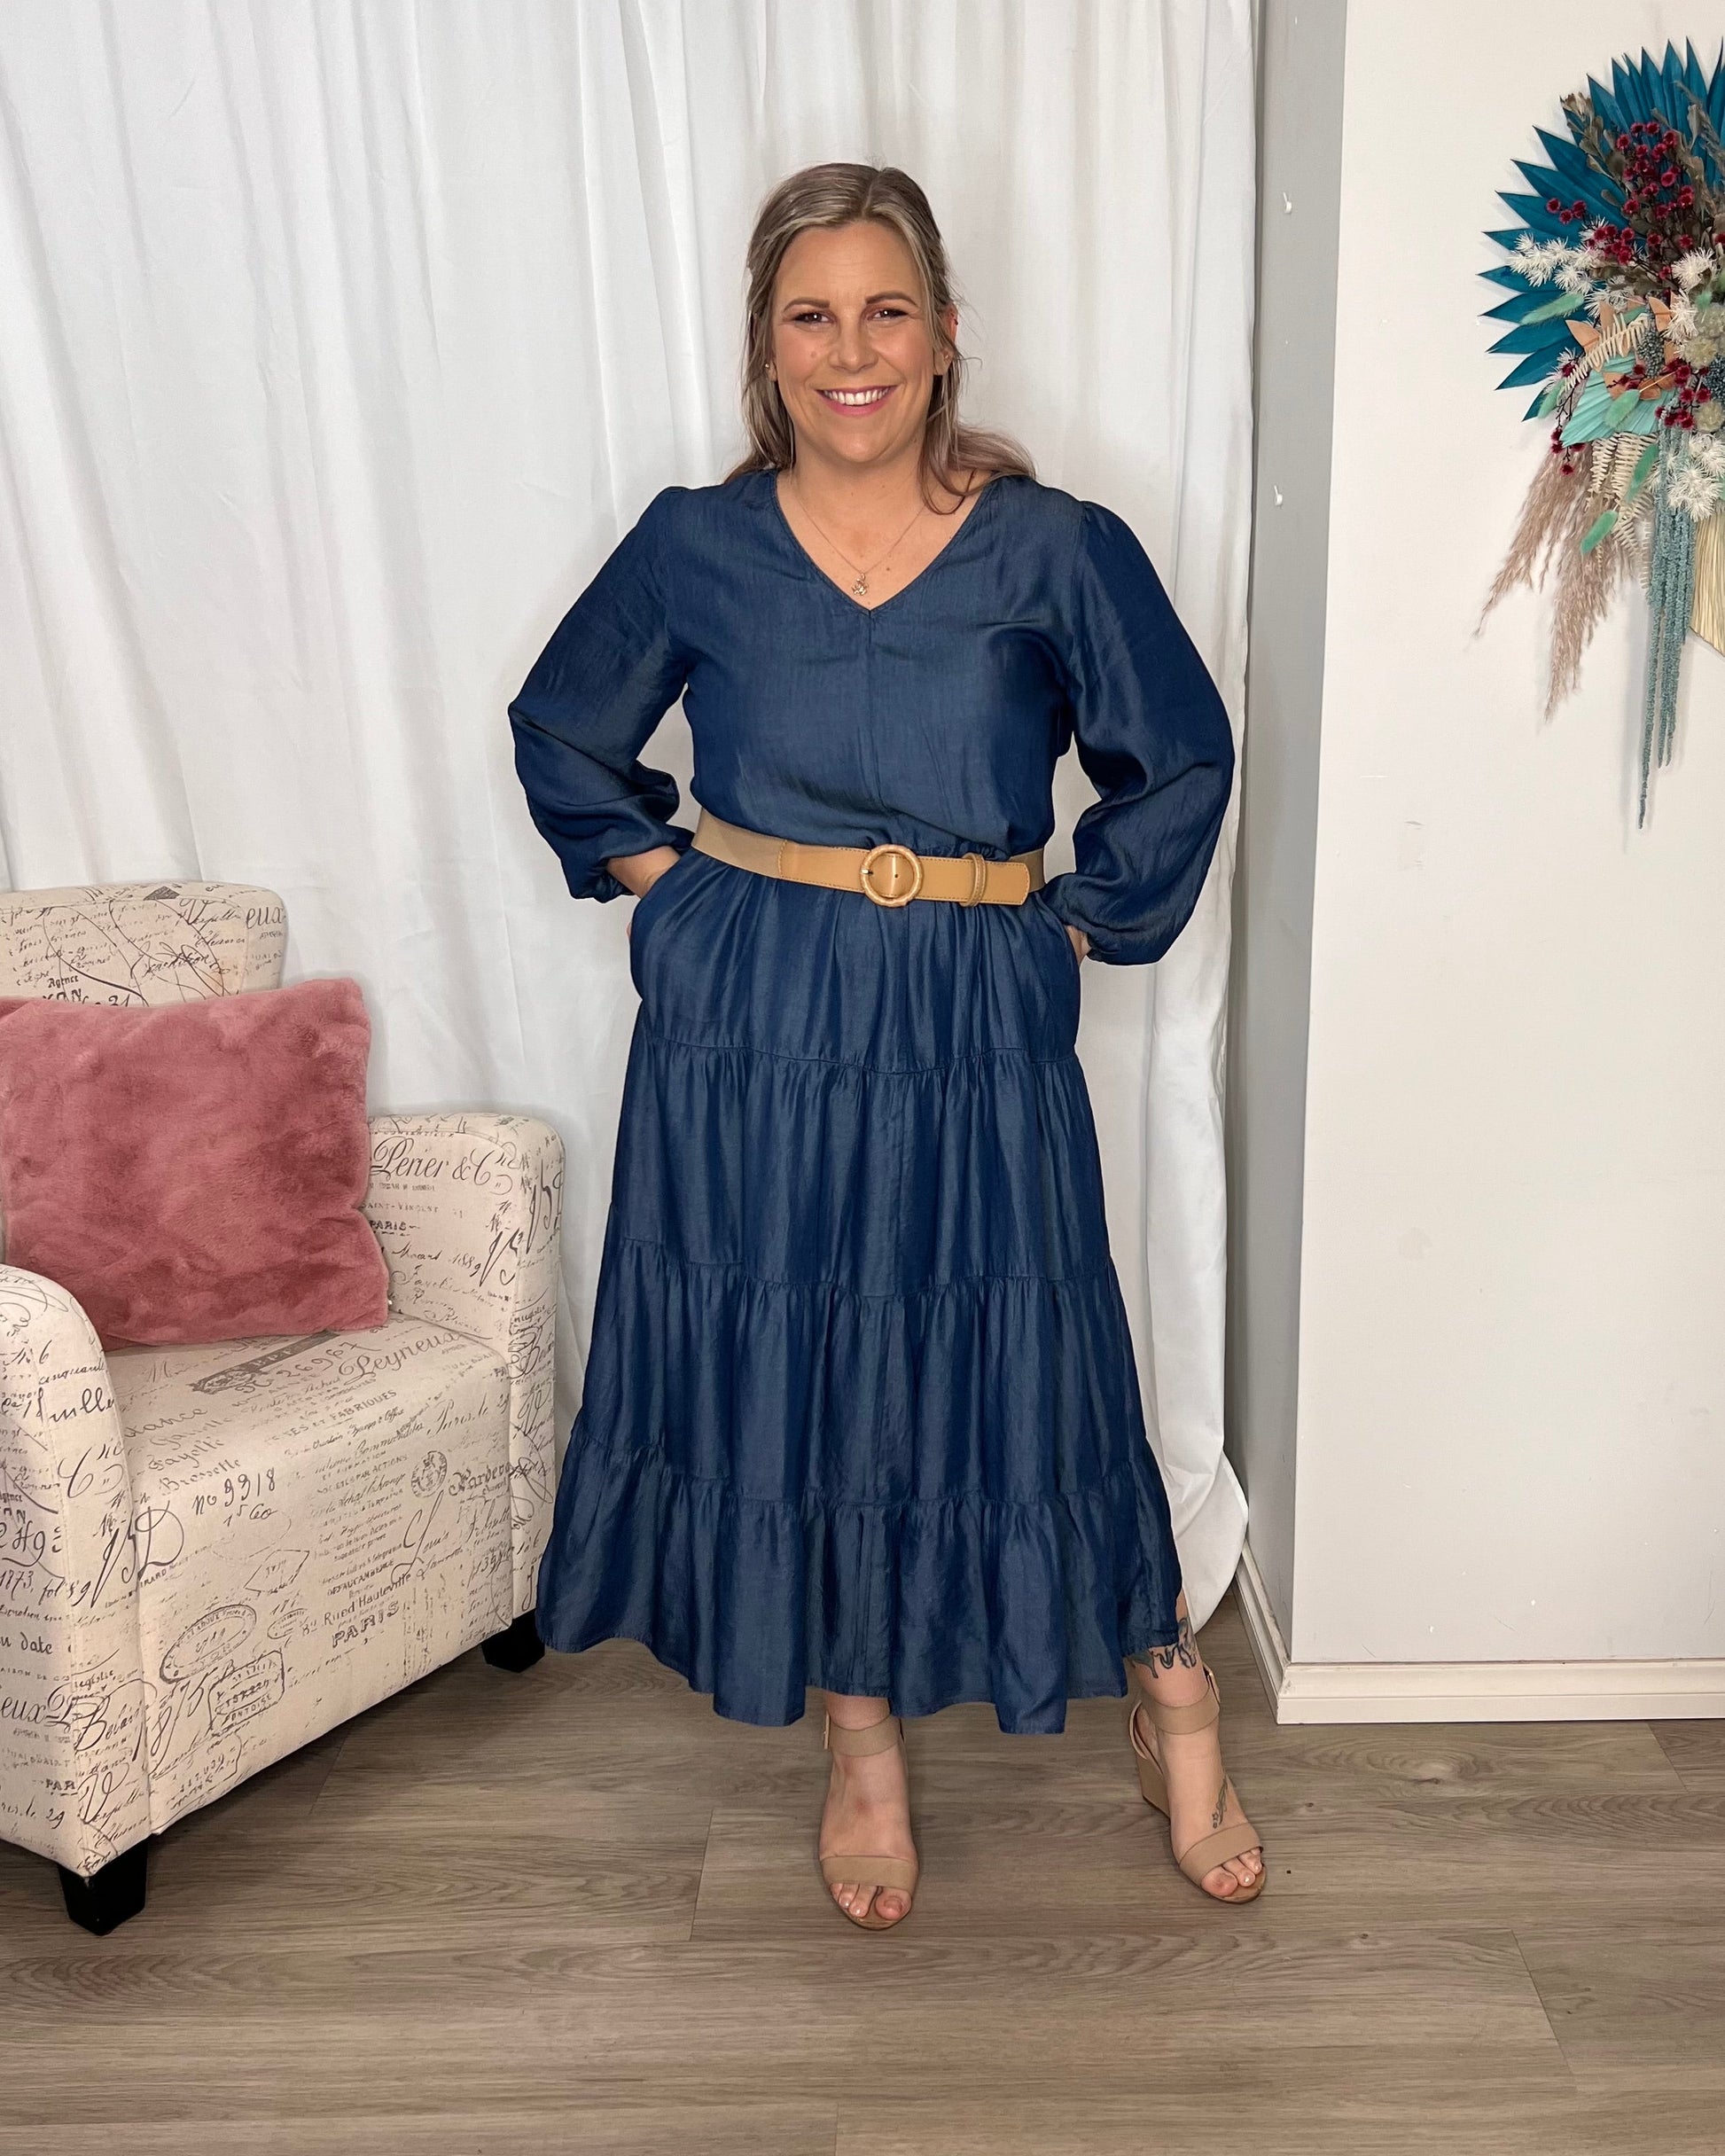 Janie Dress - Navy | Sass Clothing | Greet easy style with The Janie Dress! This comfy-chic frock features a fab relaxed tiered panel fit, an elegant V-neckline, and 3/4 elastic-cuffed sleeves - all to 